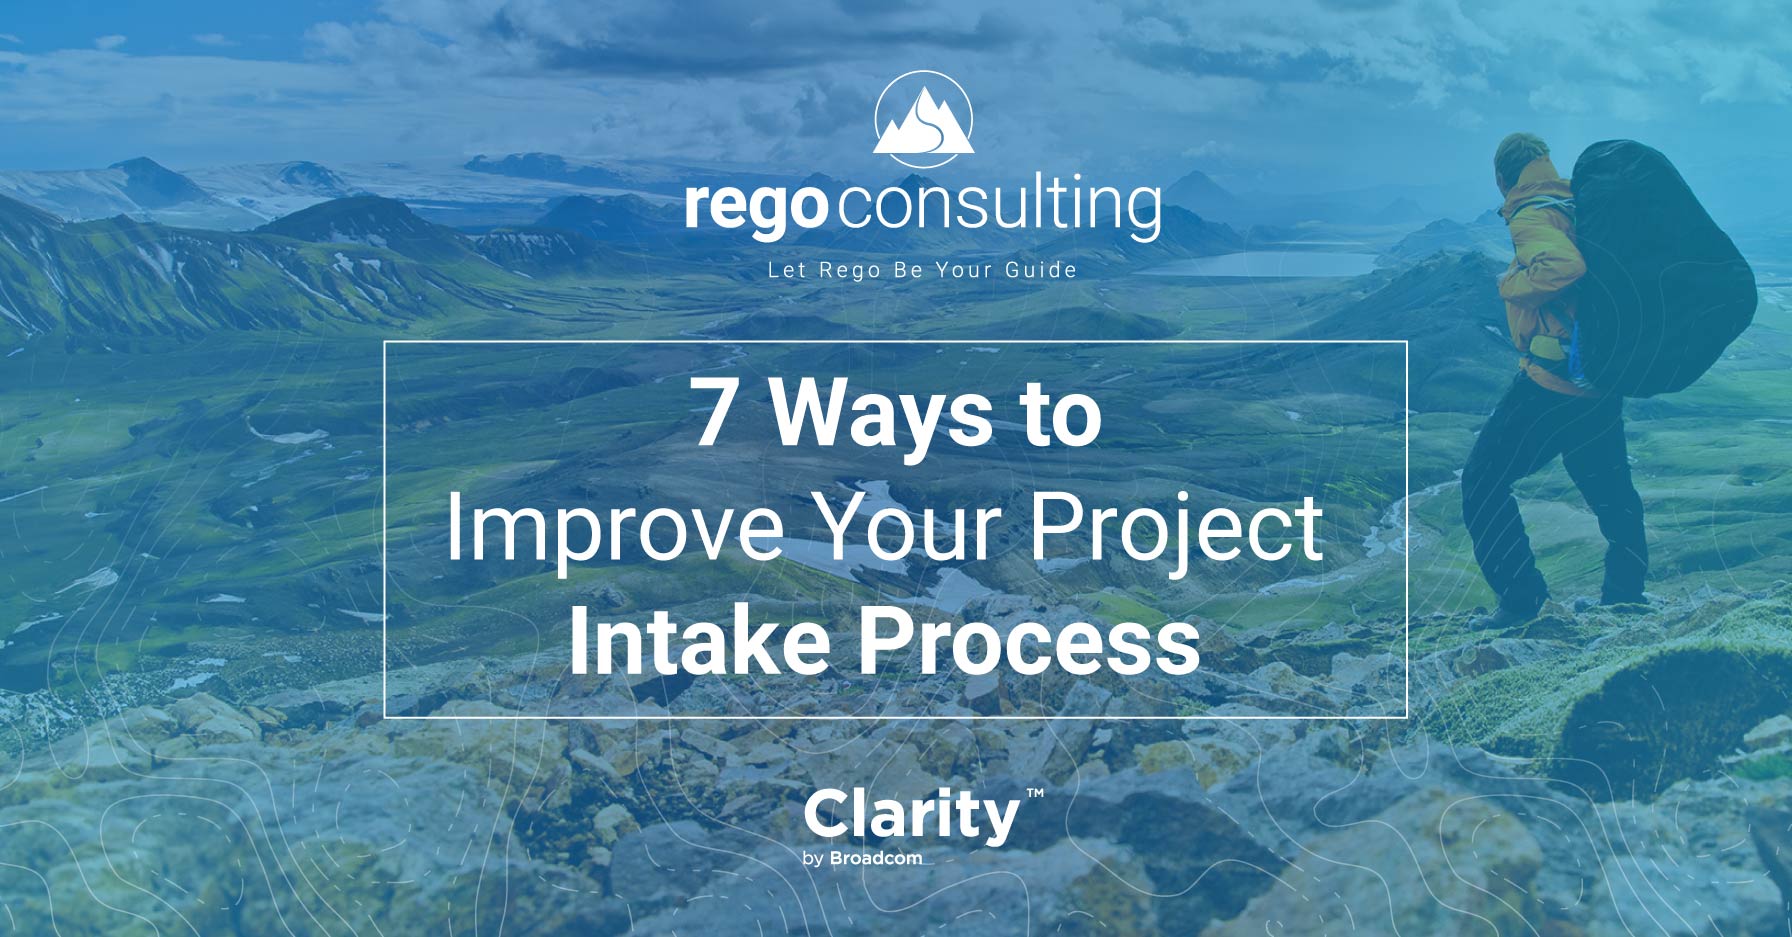 7 Ways to Improve Your Project Intake Process